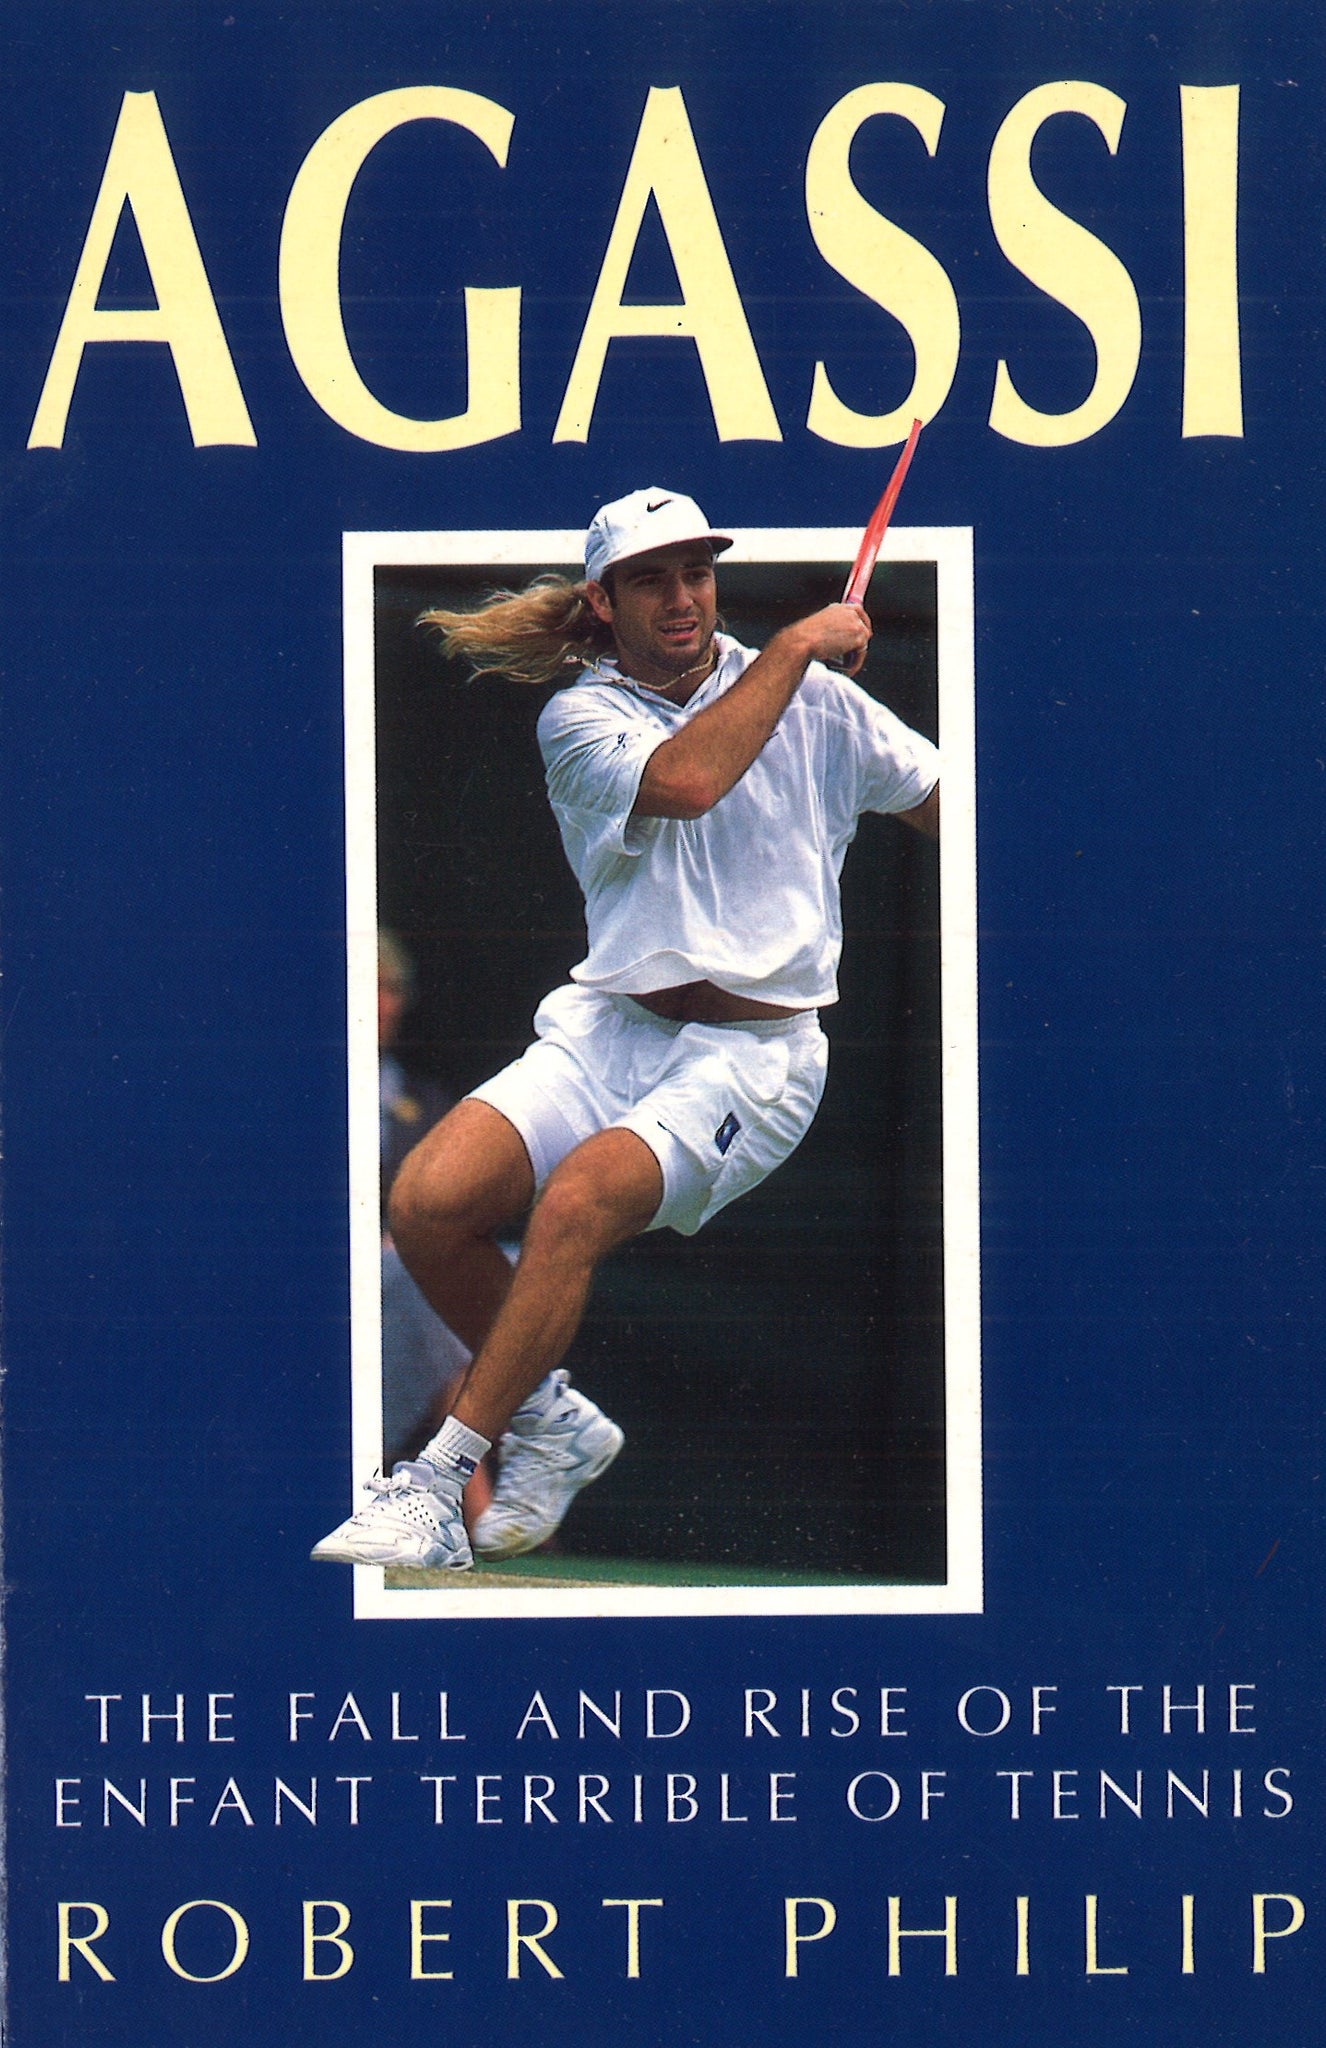 AGASSI: The Fall and Rise of the Enfant Terrible of Tennis